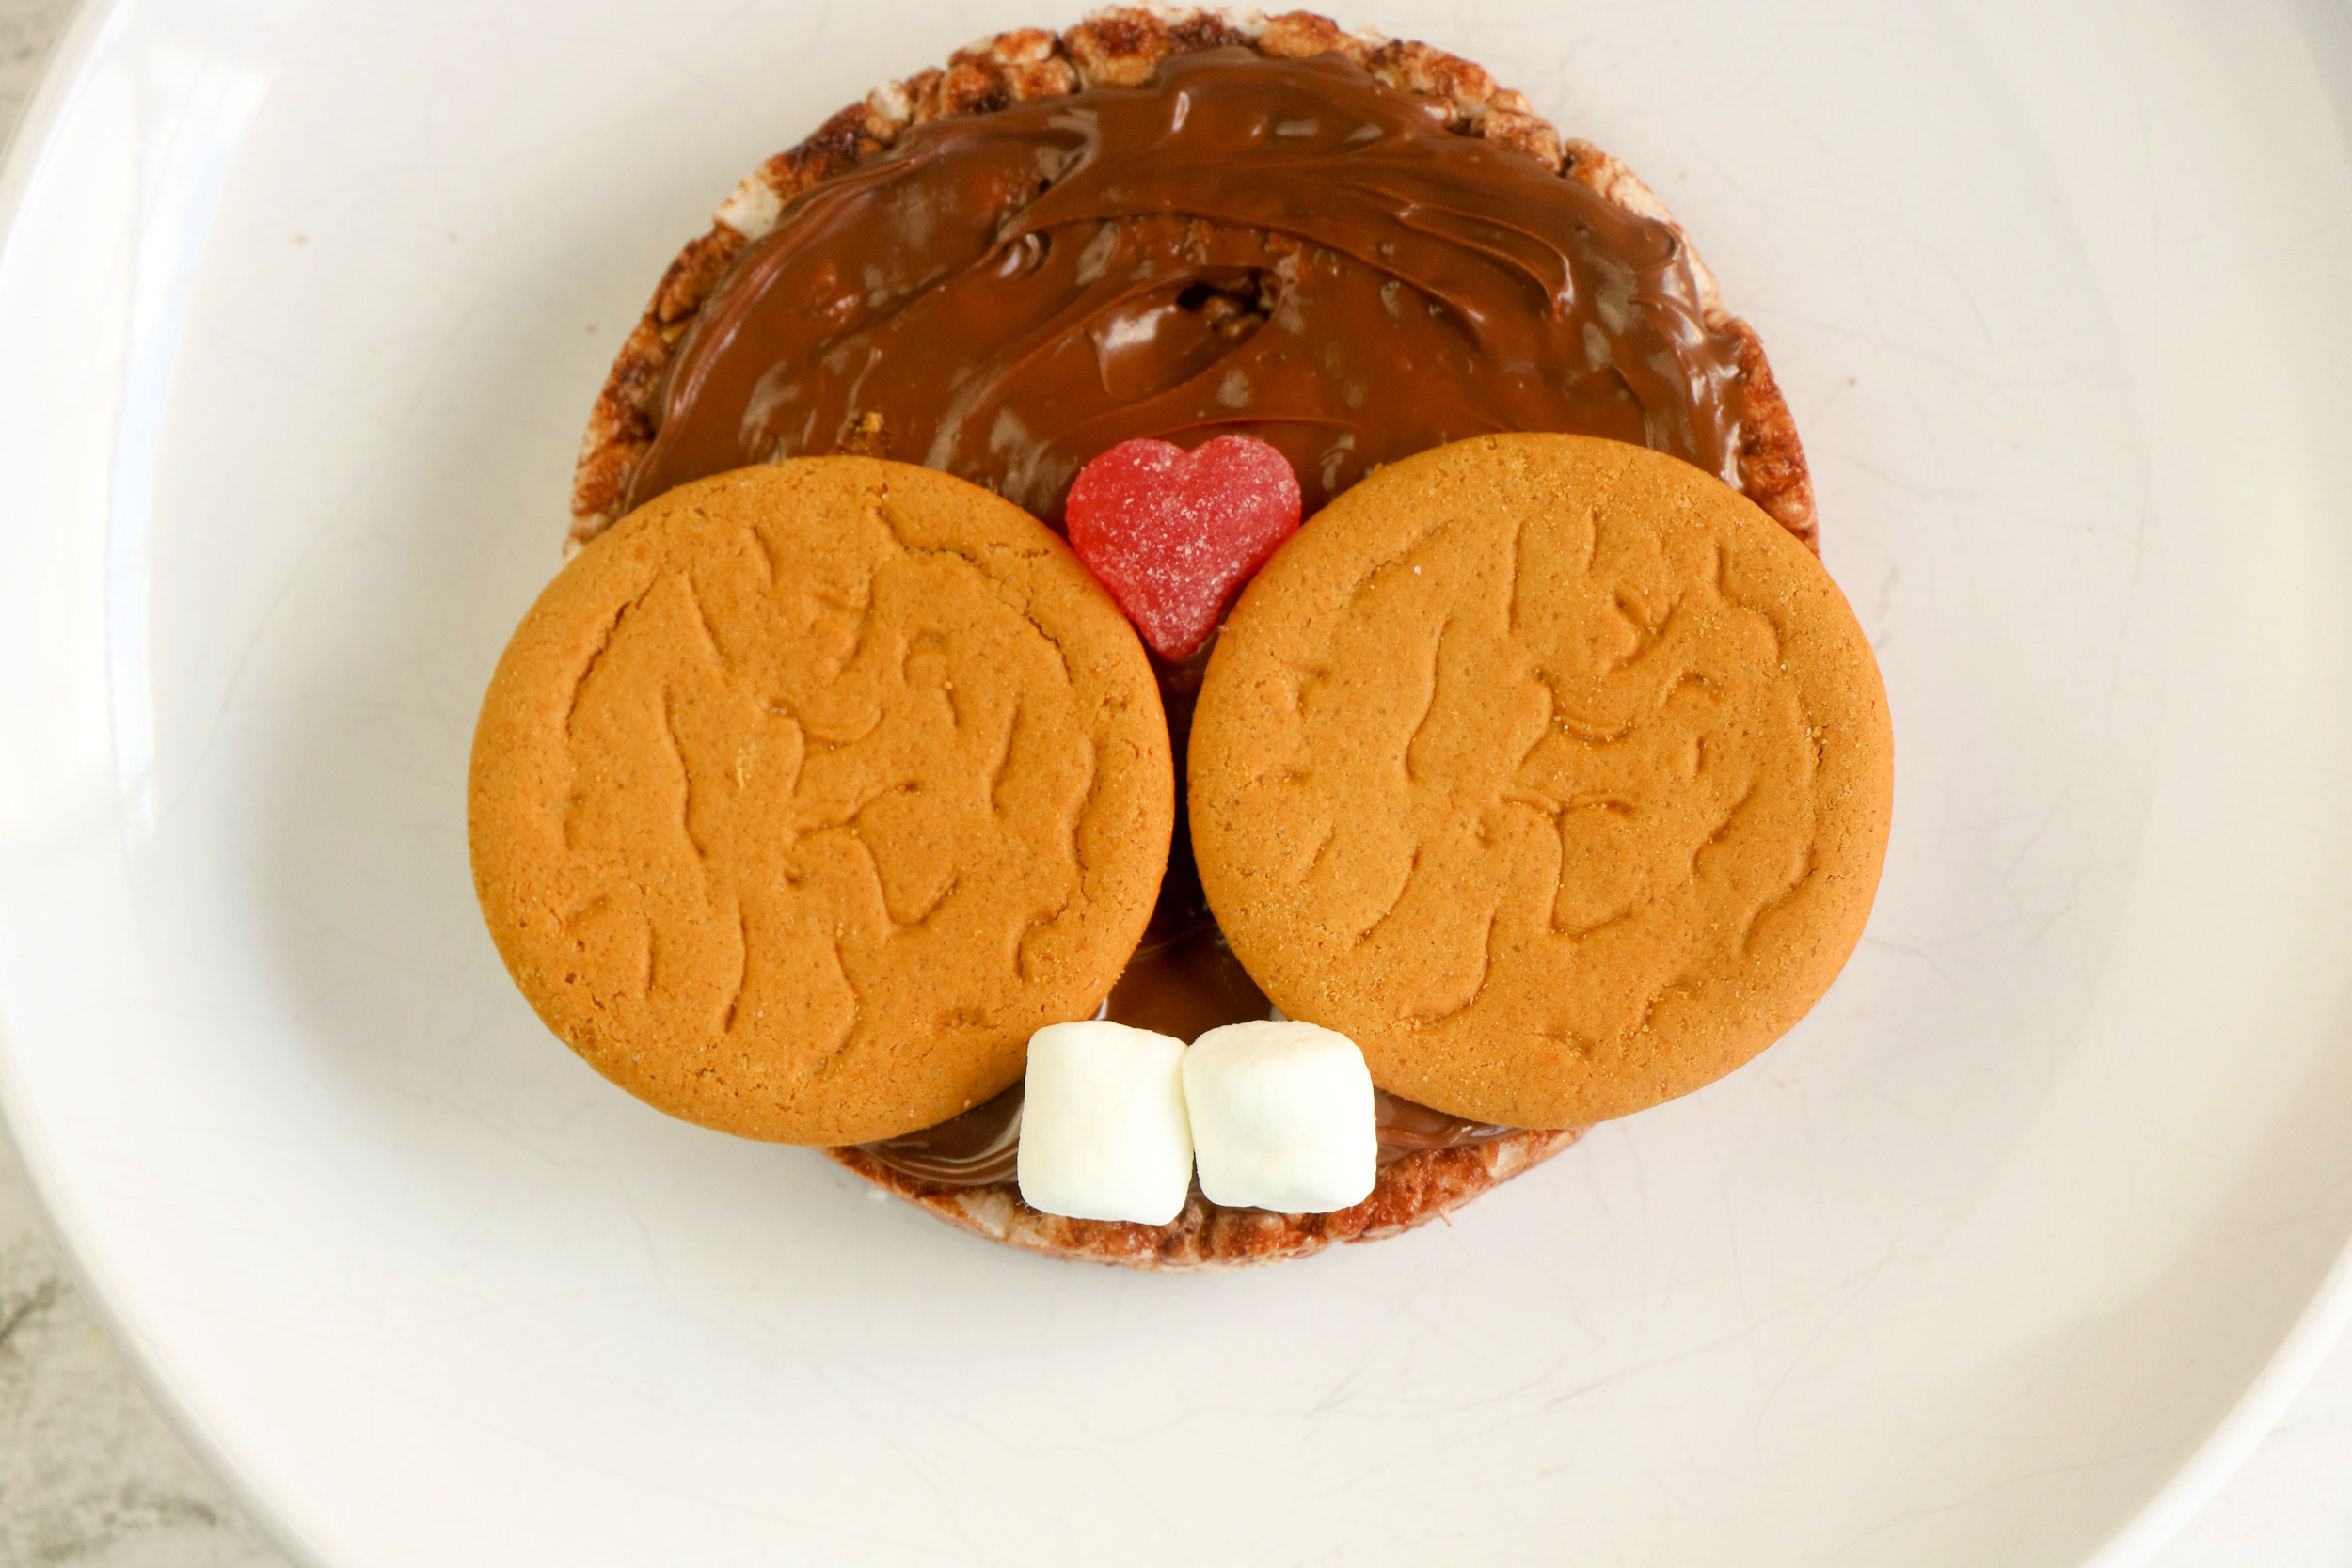 Add the heart candy as the nose and the marshmallows as the cute little buck teeth. 